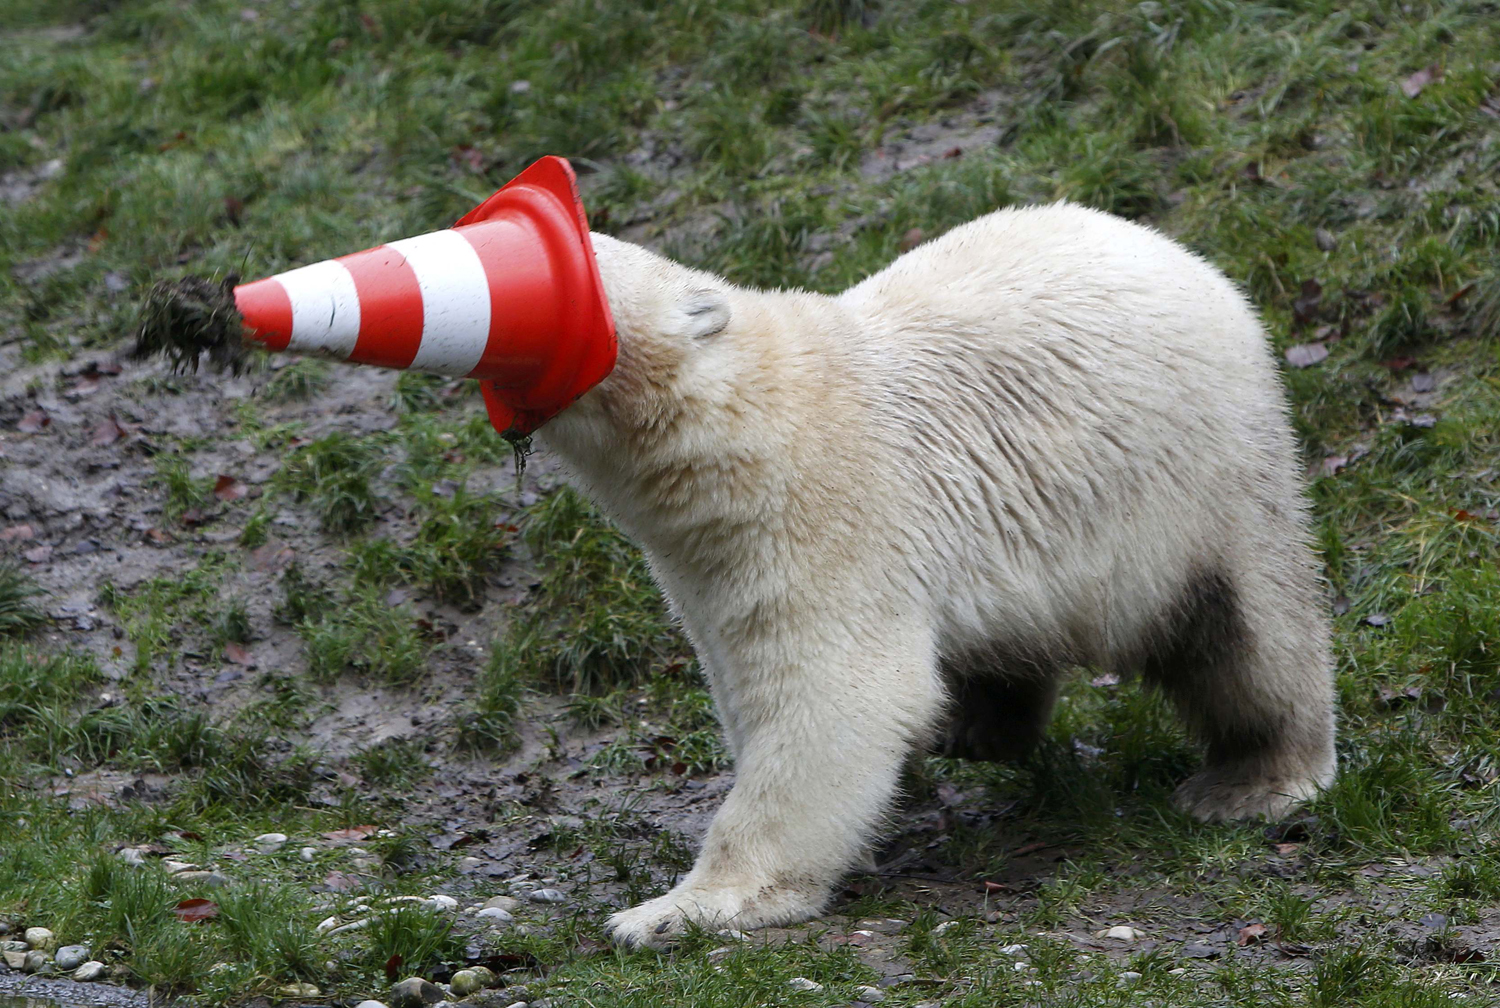 A polar bear plays with a pylon during celebrations marking its first birthday in an enclosure at Munich Zoo.